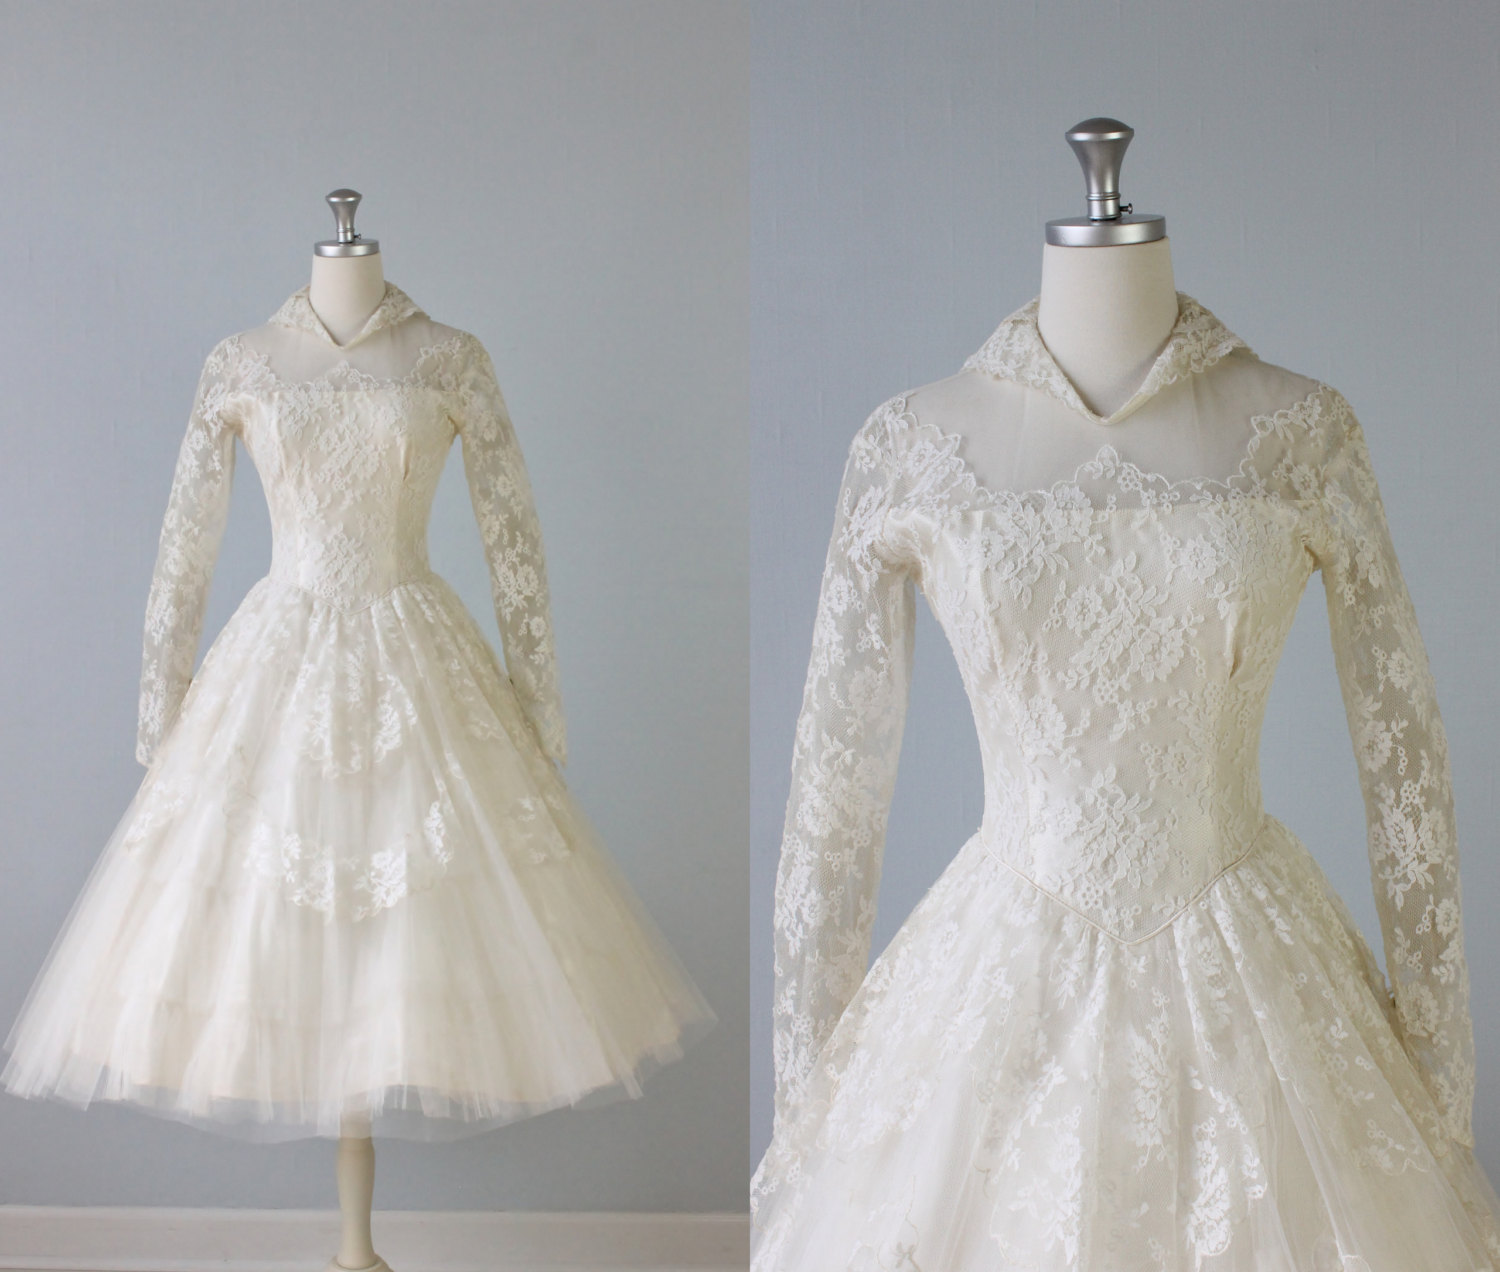 1950s Tea Length Vintage Wedding Dress with long lace sleeves